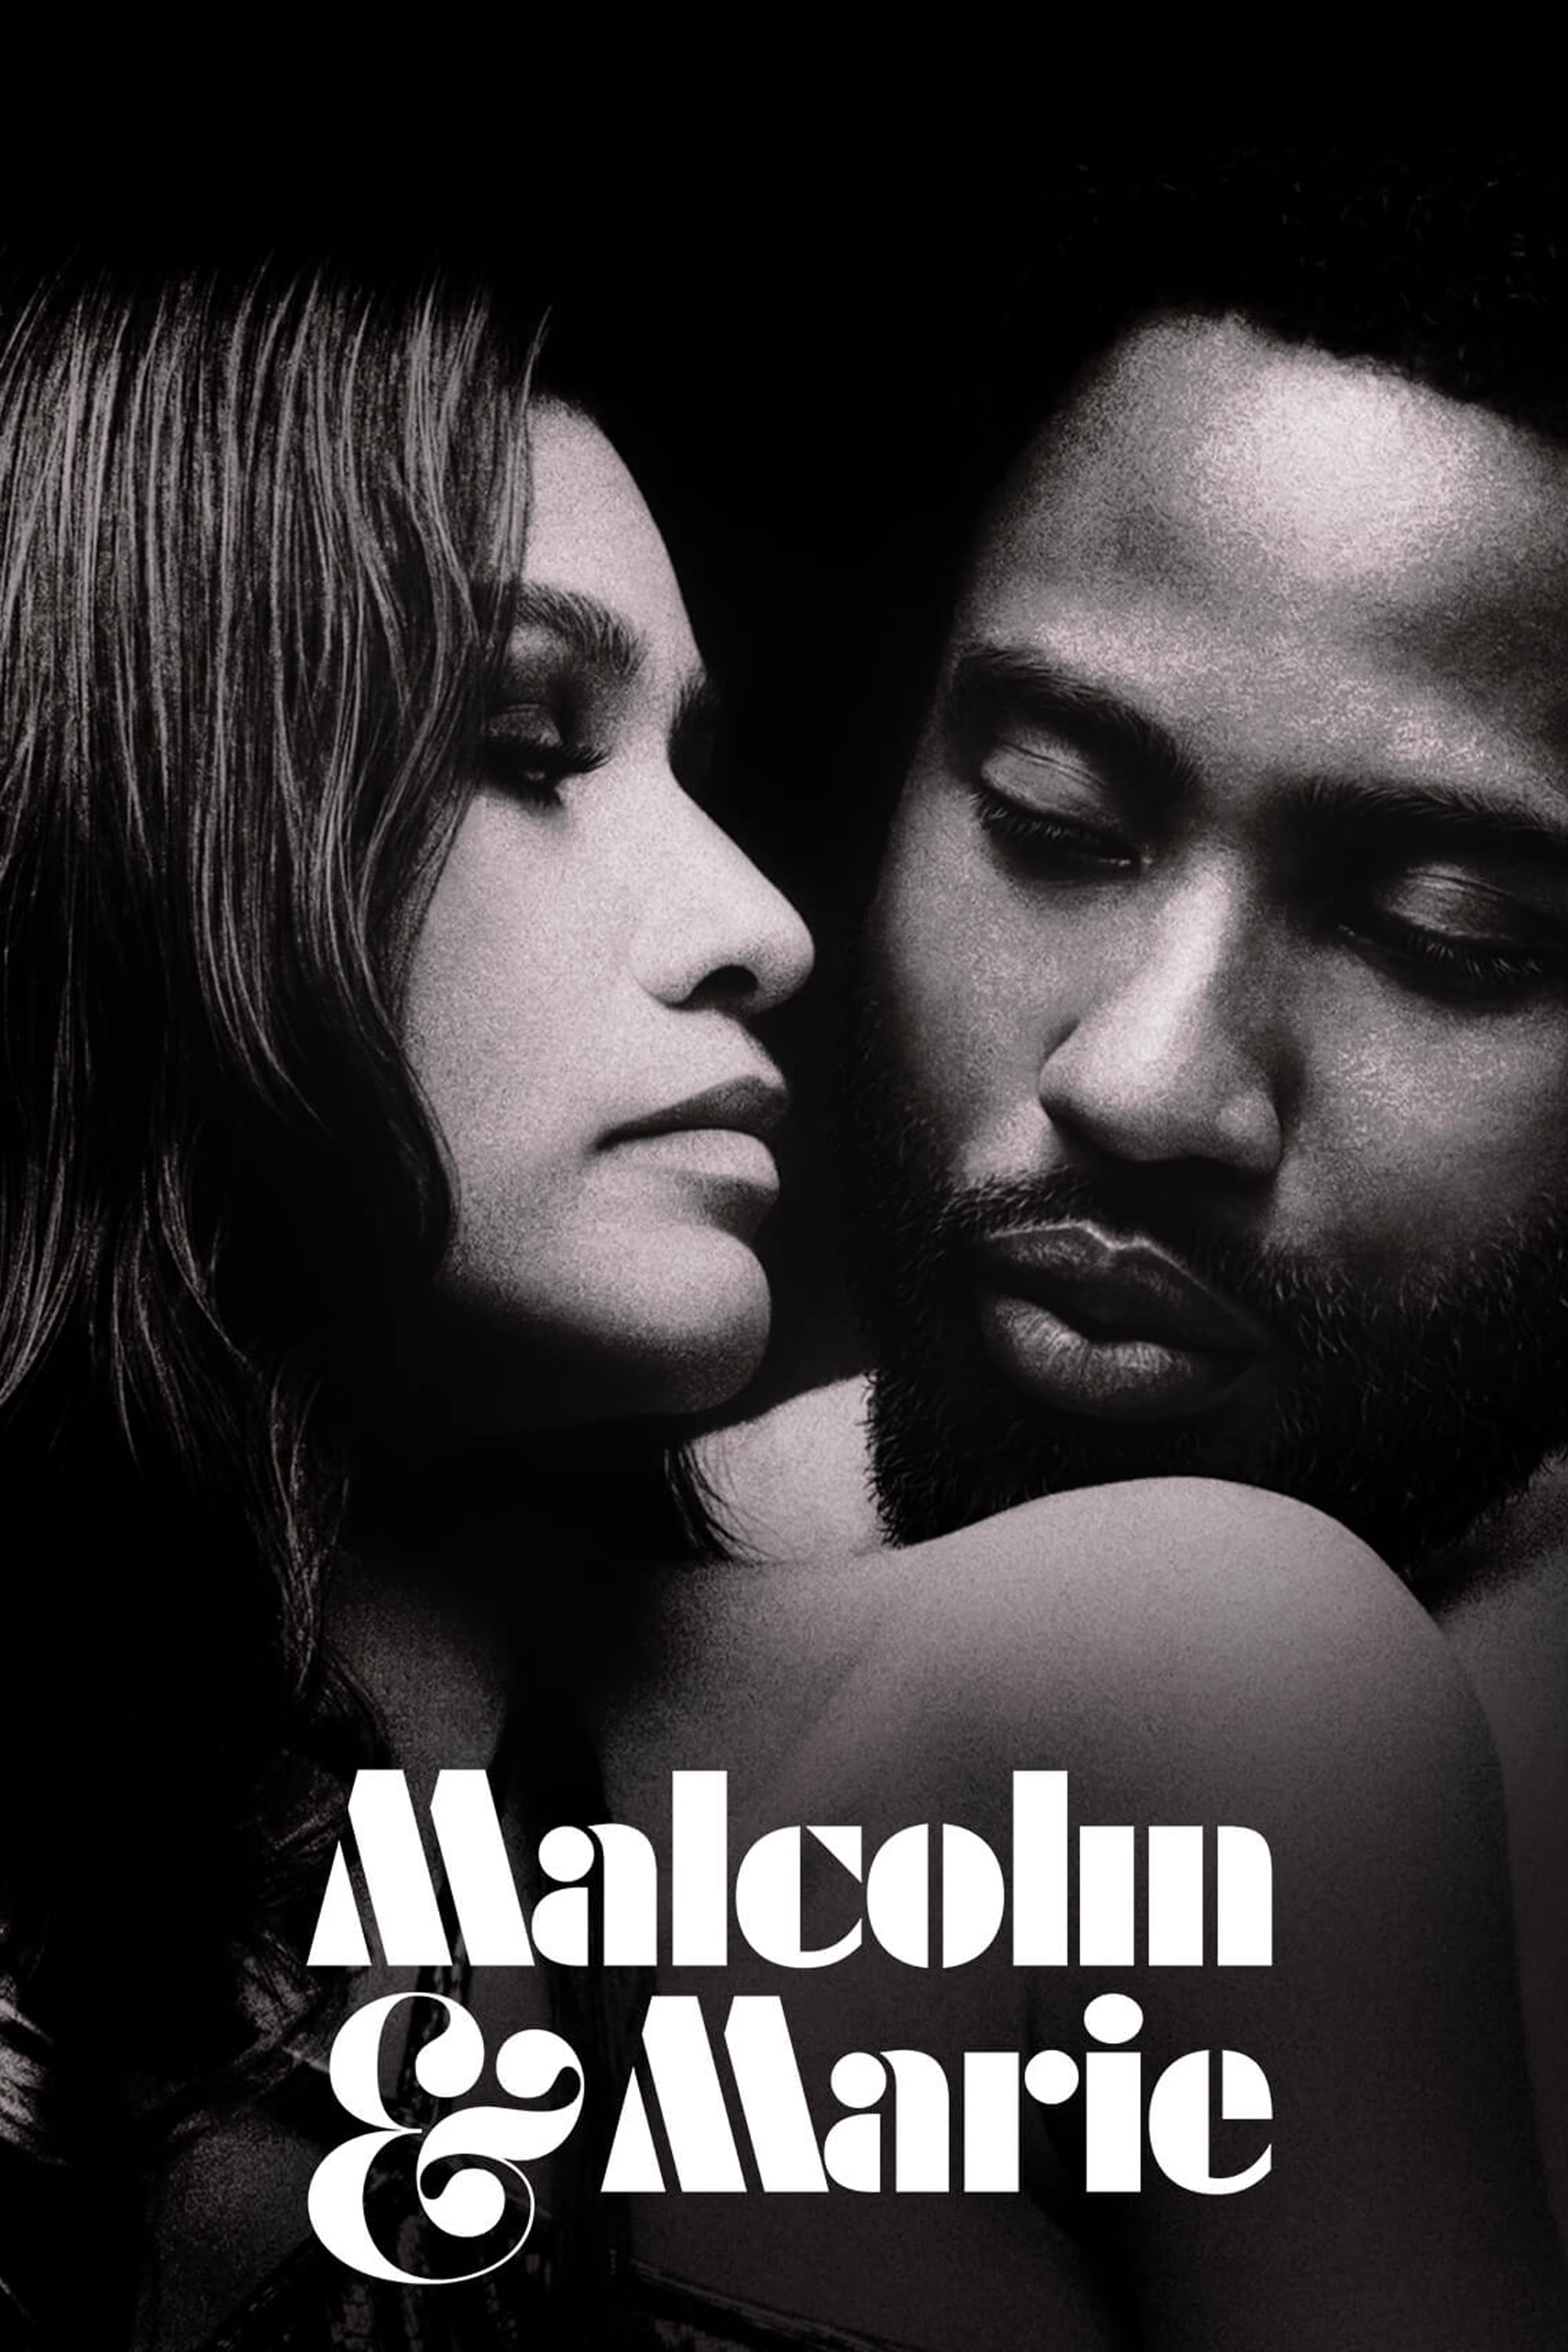 Malcolm and Marie, Online streaming options, Release dates, Netflix film, 2000x3000 HD Handy